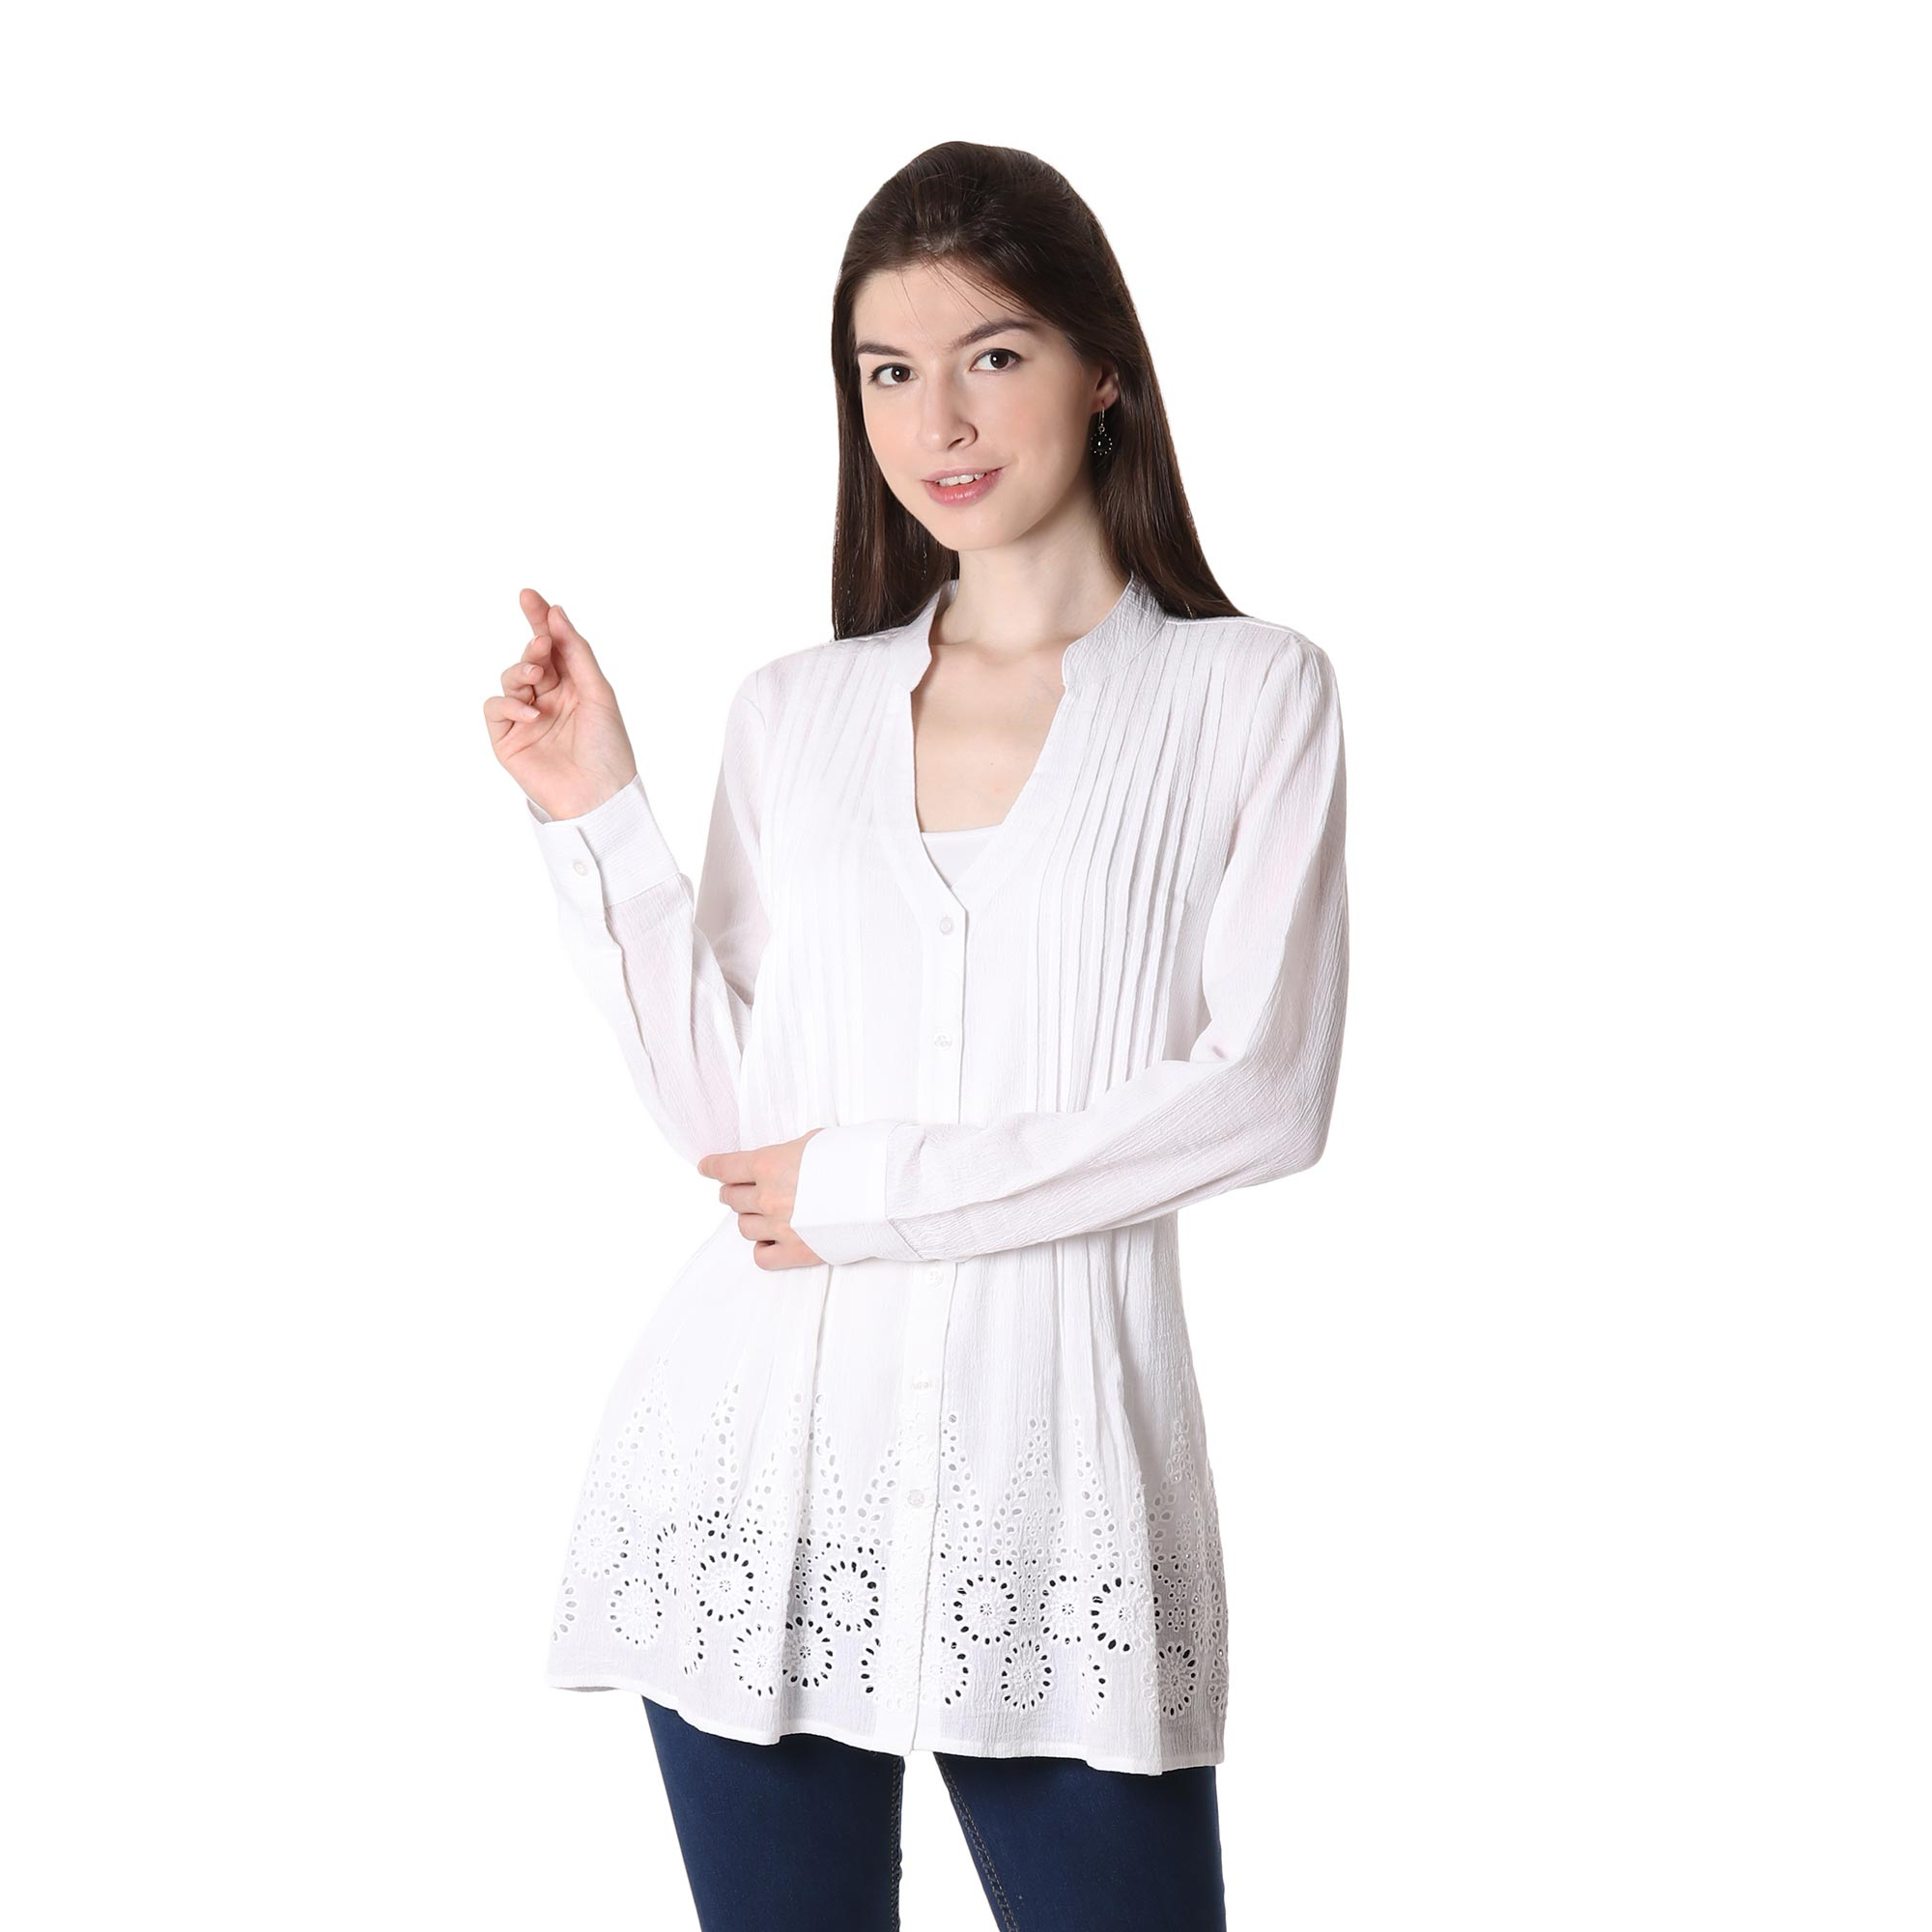 UNICEF Market | Eyelet Pattern Cotton Blouse in White from India ...